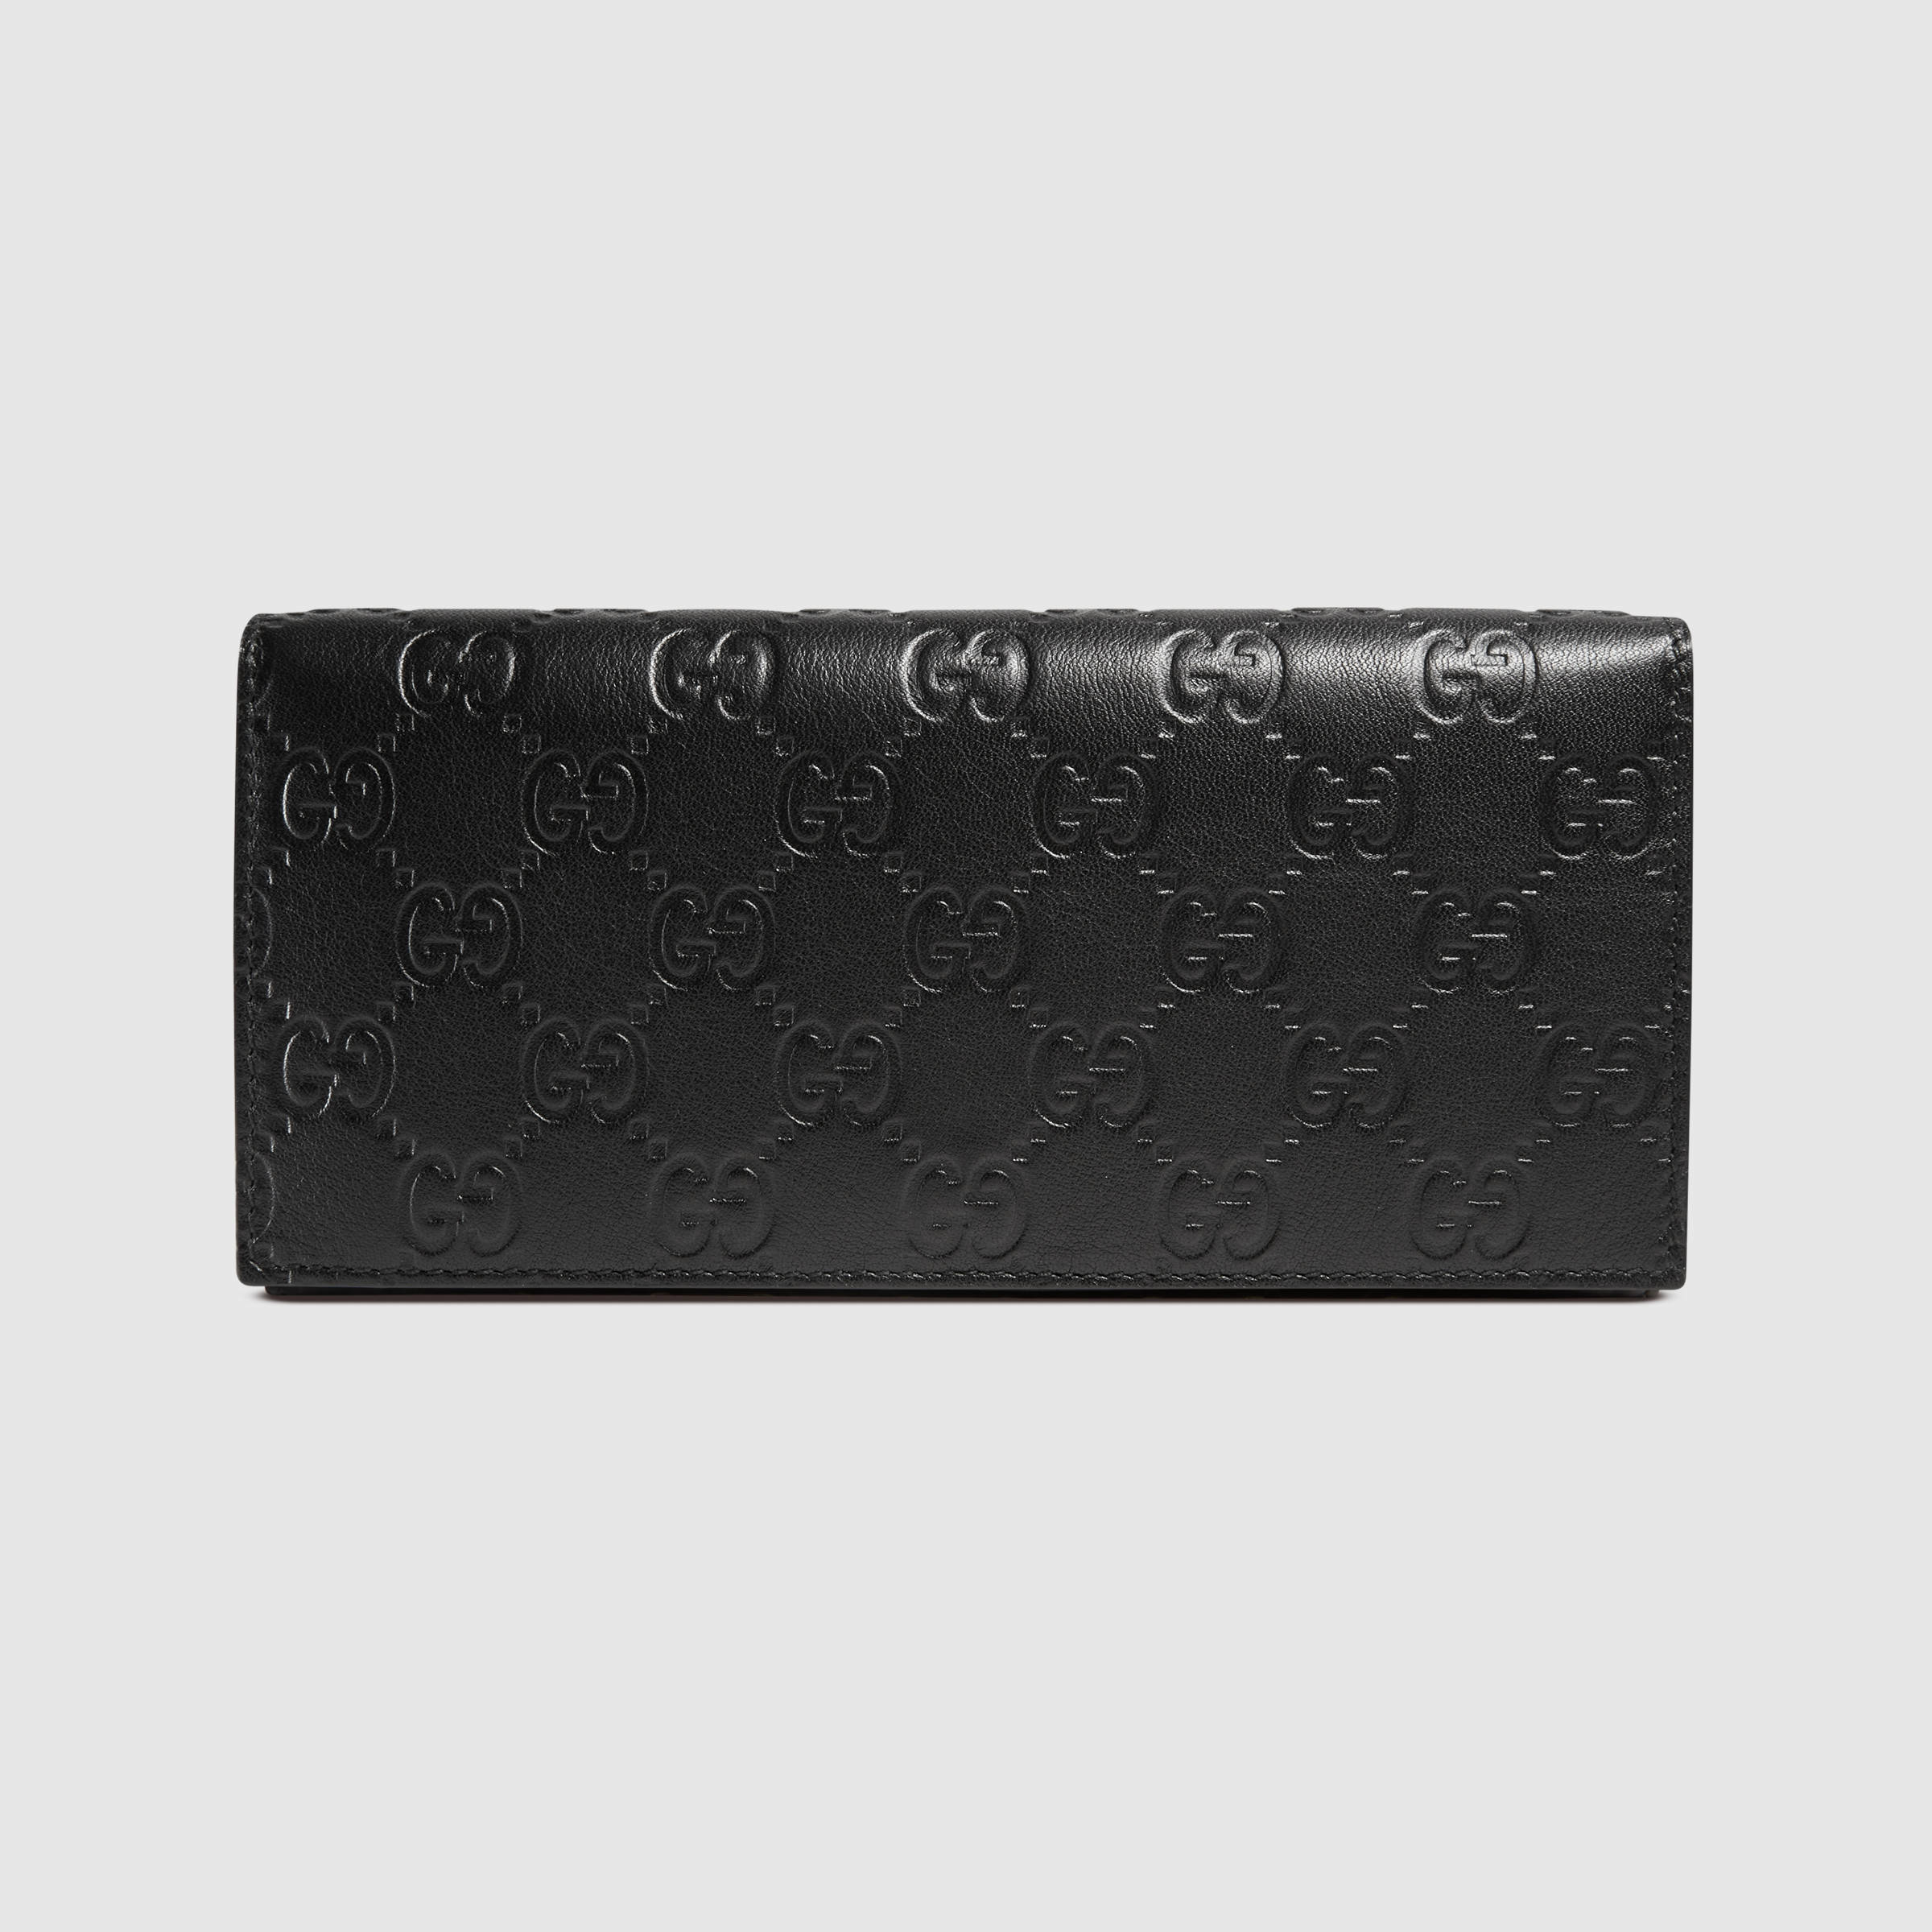 Gucci Ssima Leather Long Wallet in Black for Men - Lyst